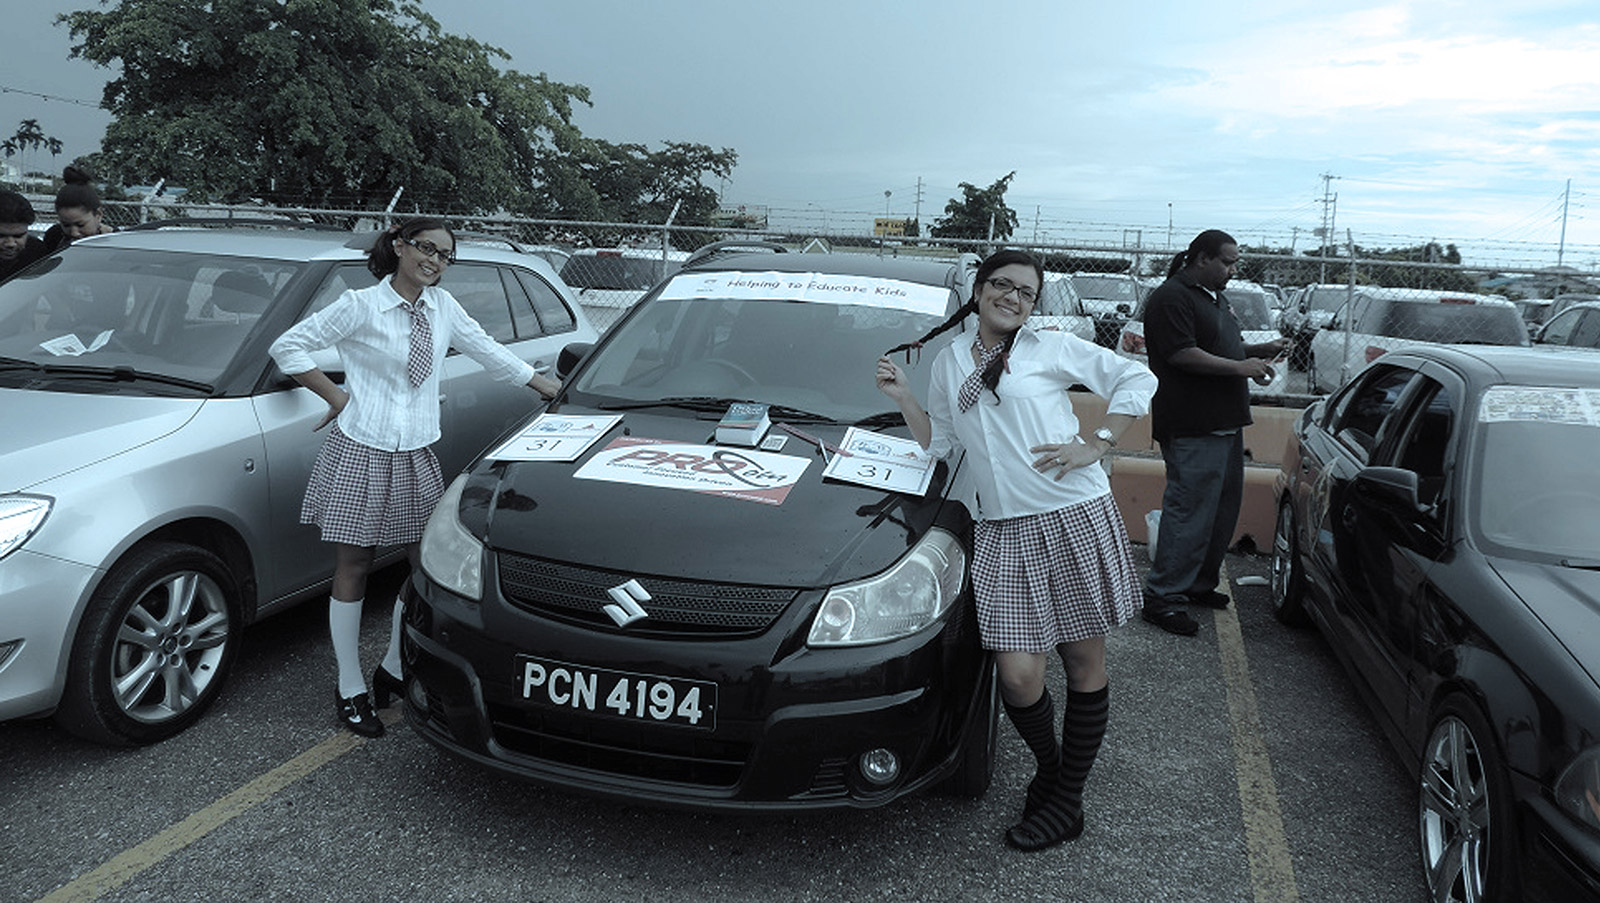 2013: Express Childrens' Fund Car Rally